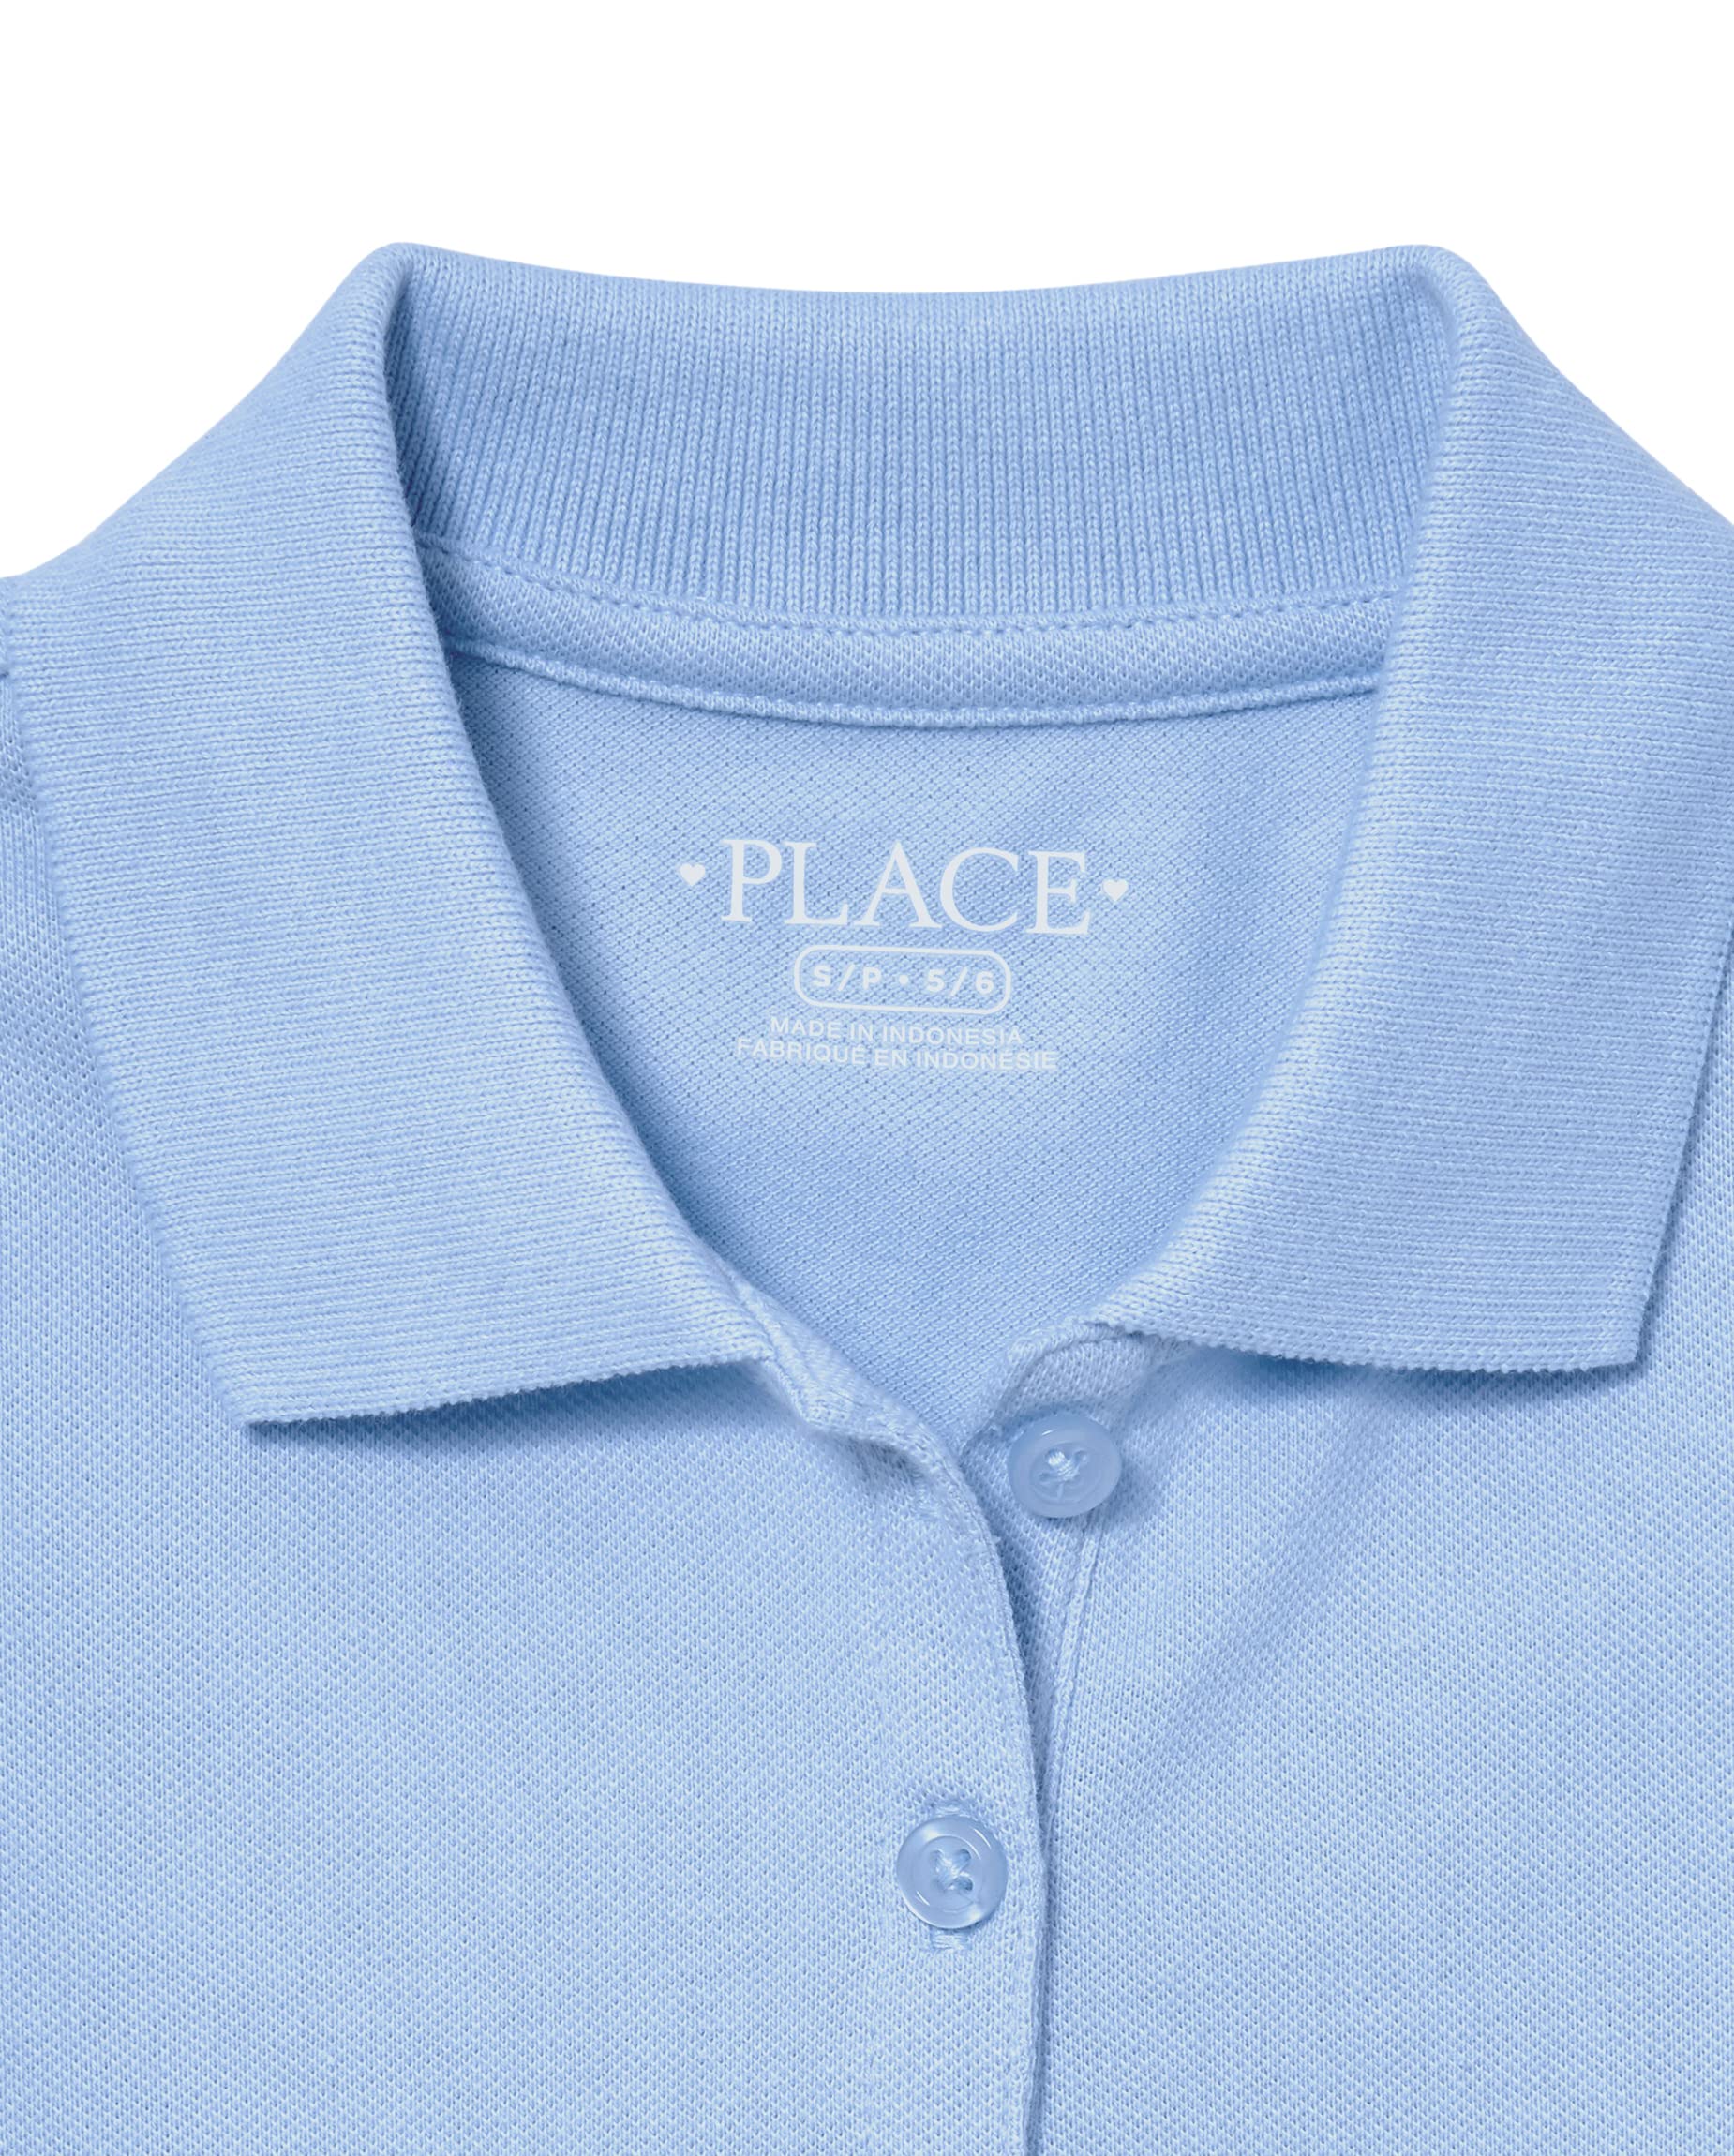 The Children's Place Girls' Short Sleeve Pique Polo